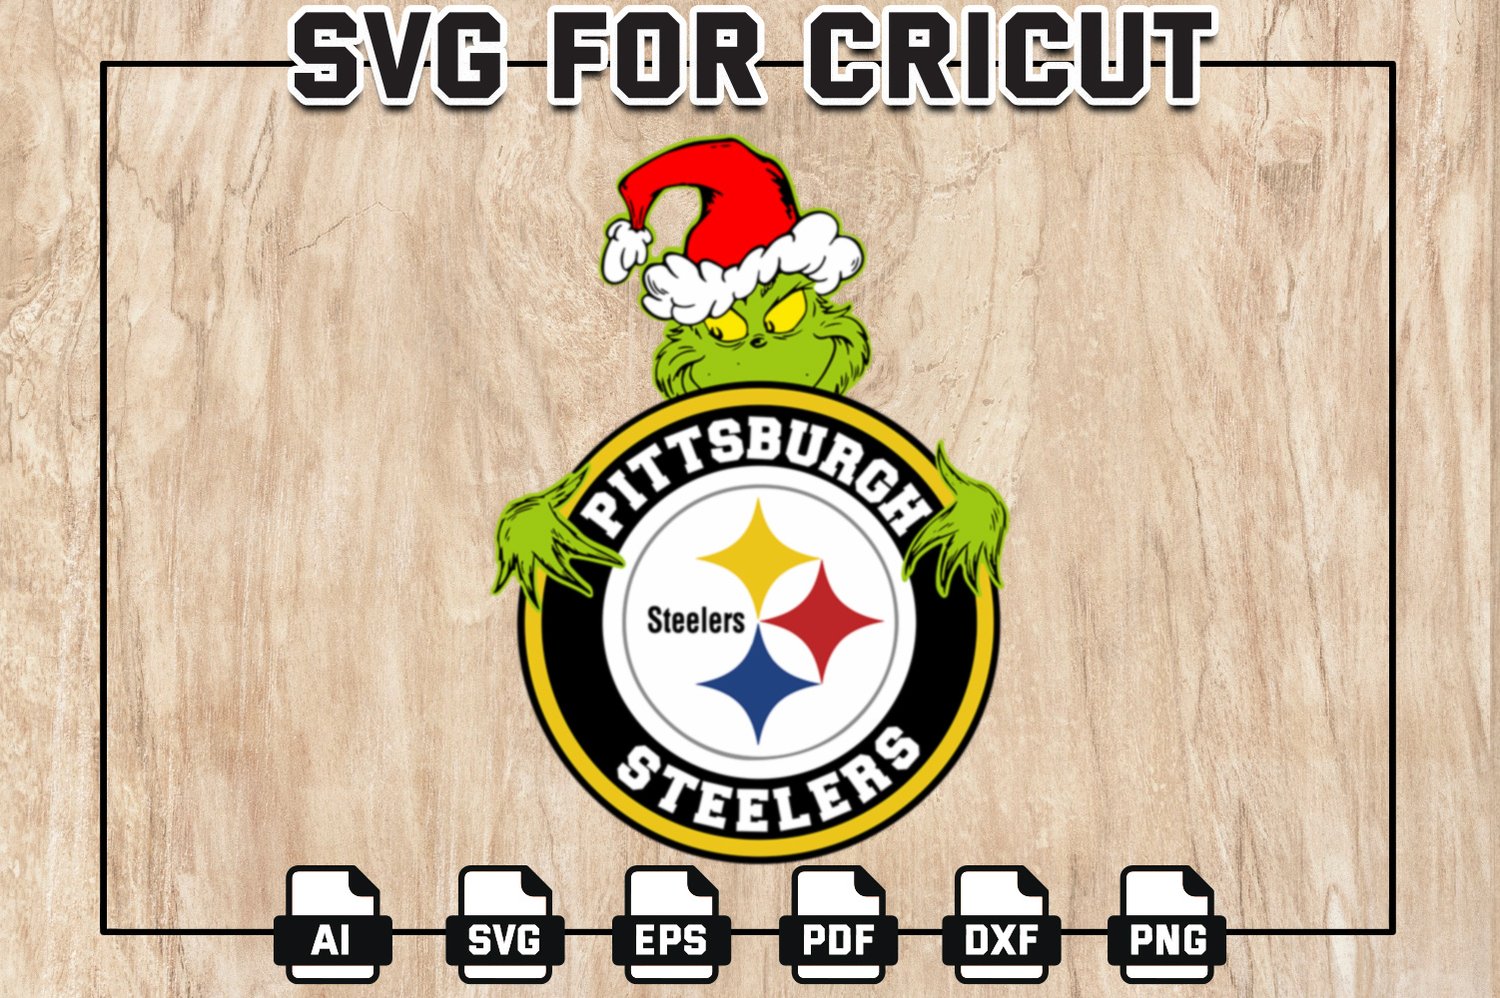 NFL Pittsburgh Steelers Makes Me Happy You Not So Much Grinch